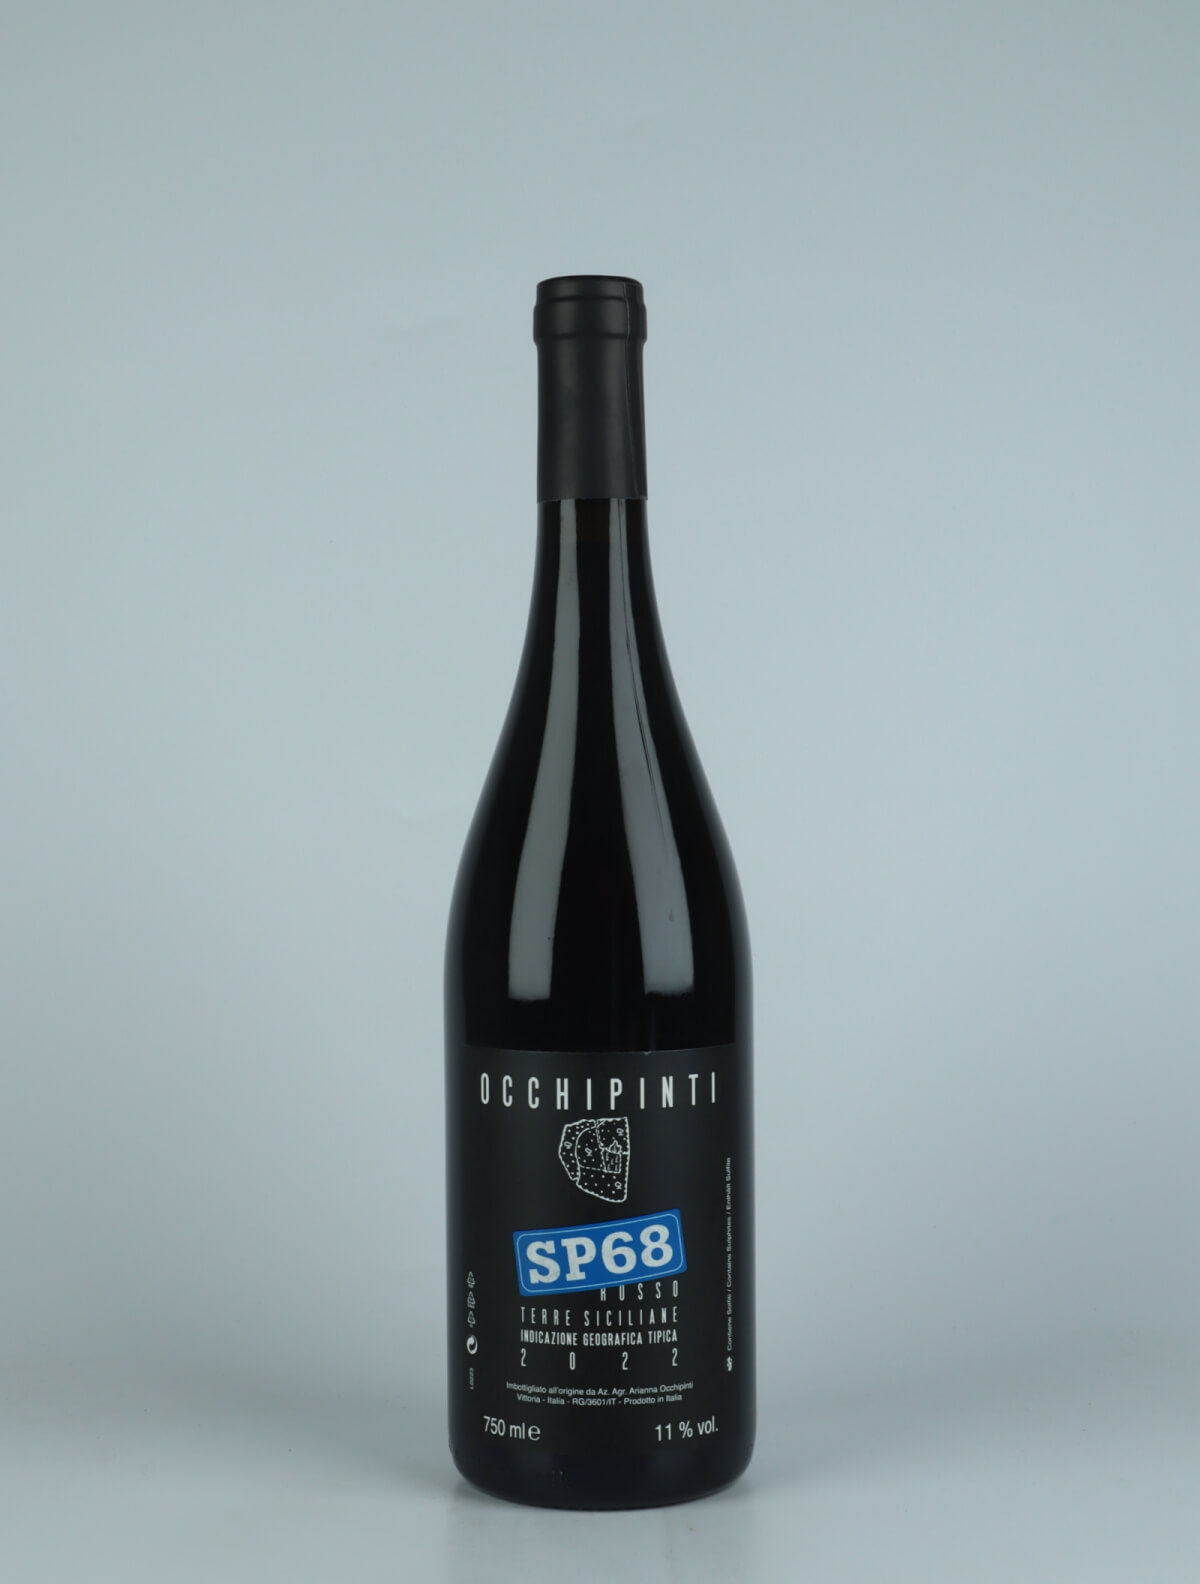 A bottle 2022 SP68 Rosso Red wine from Arianna Occhipinti, Sicily in Italy